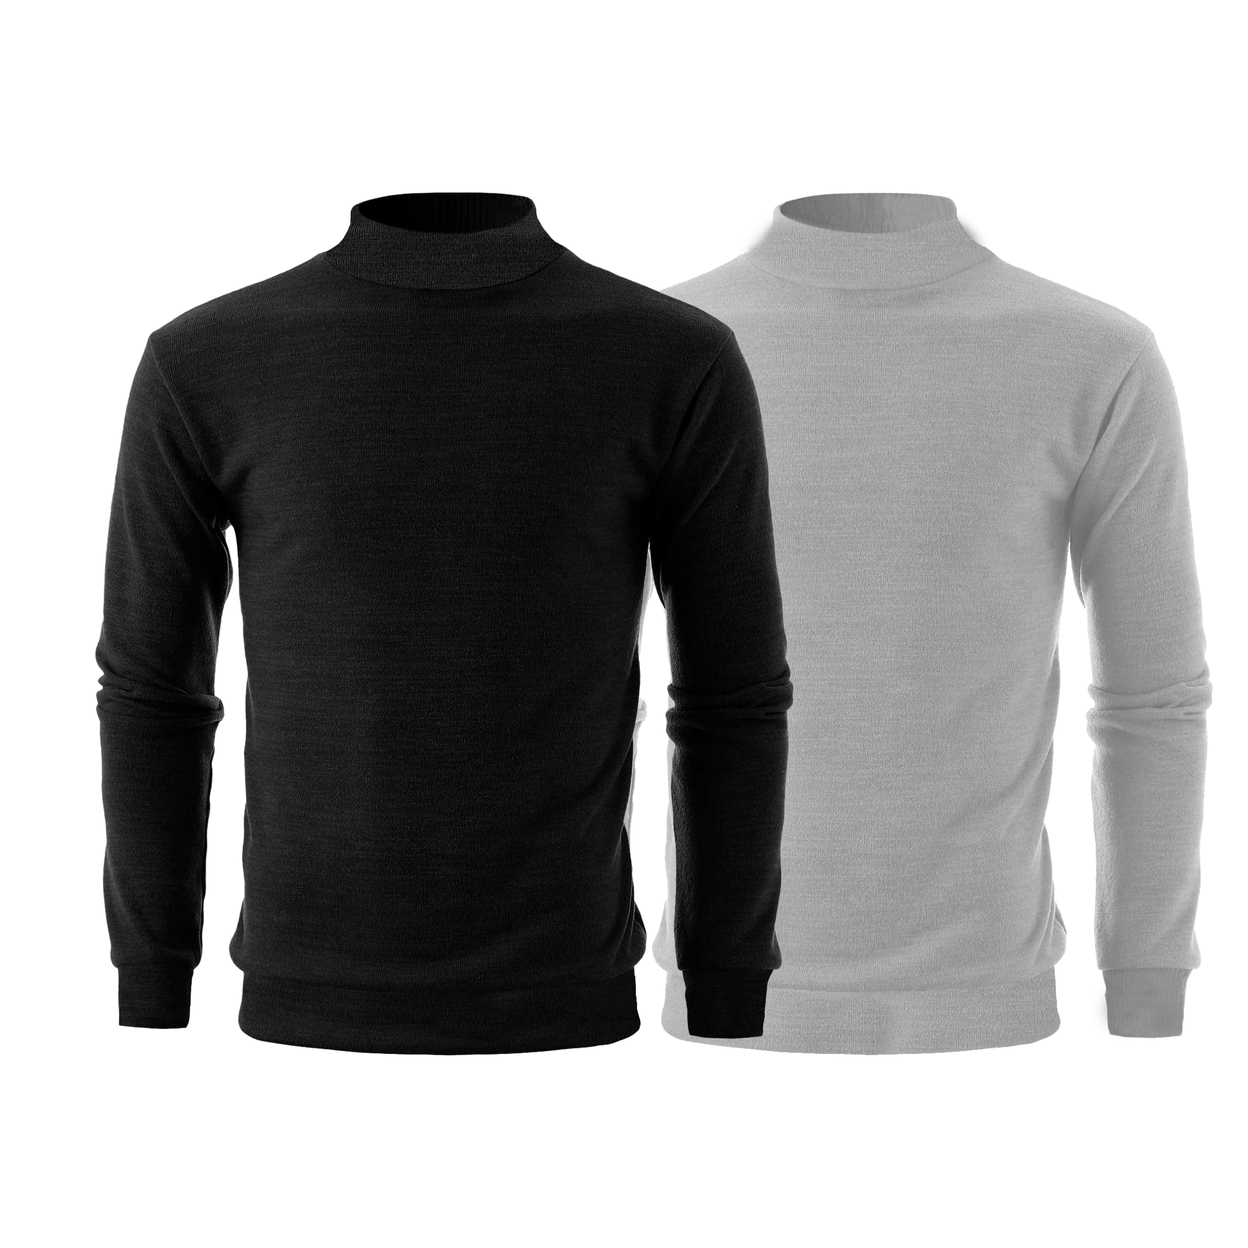 2-Pack: Men's Winter Warm Cozy Knit Slim Fit Mock Neck Sweater - White & Charcoal, Small